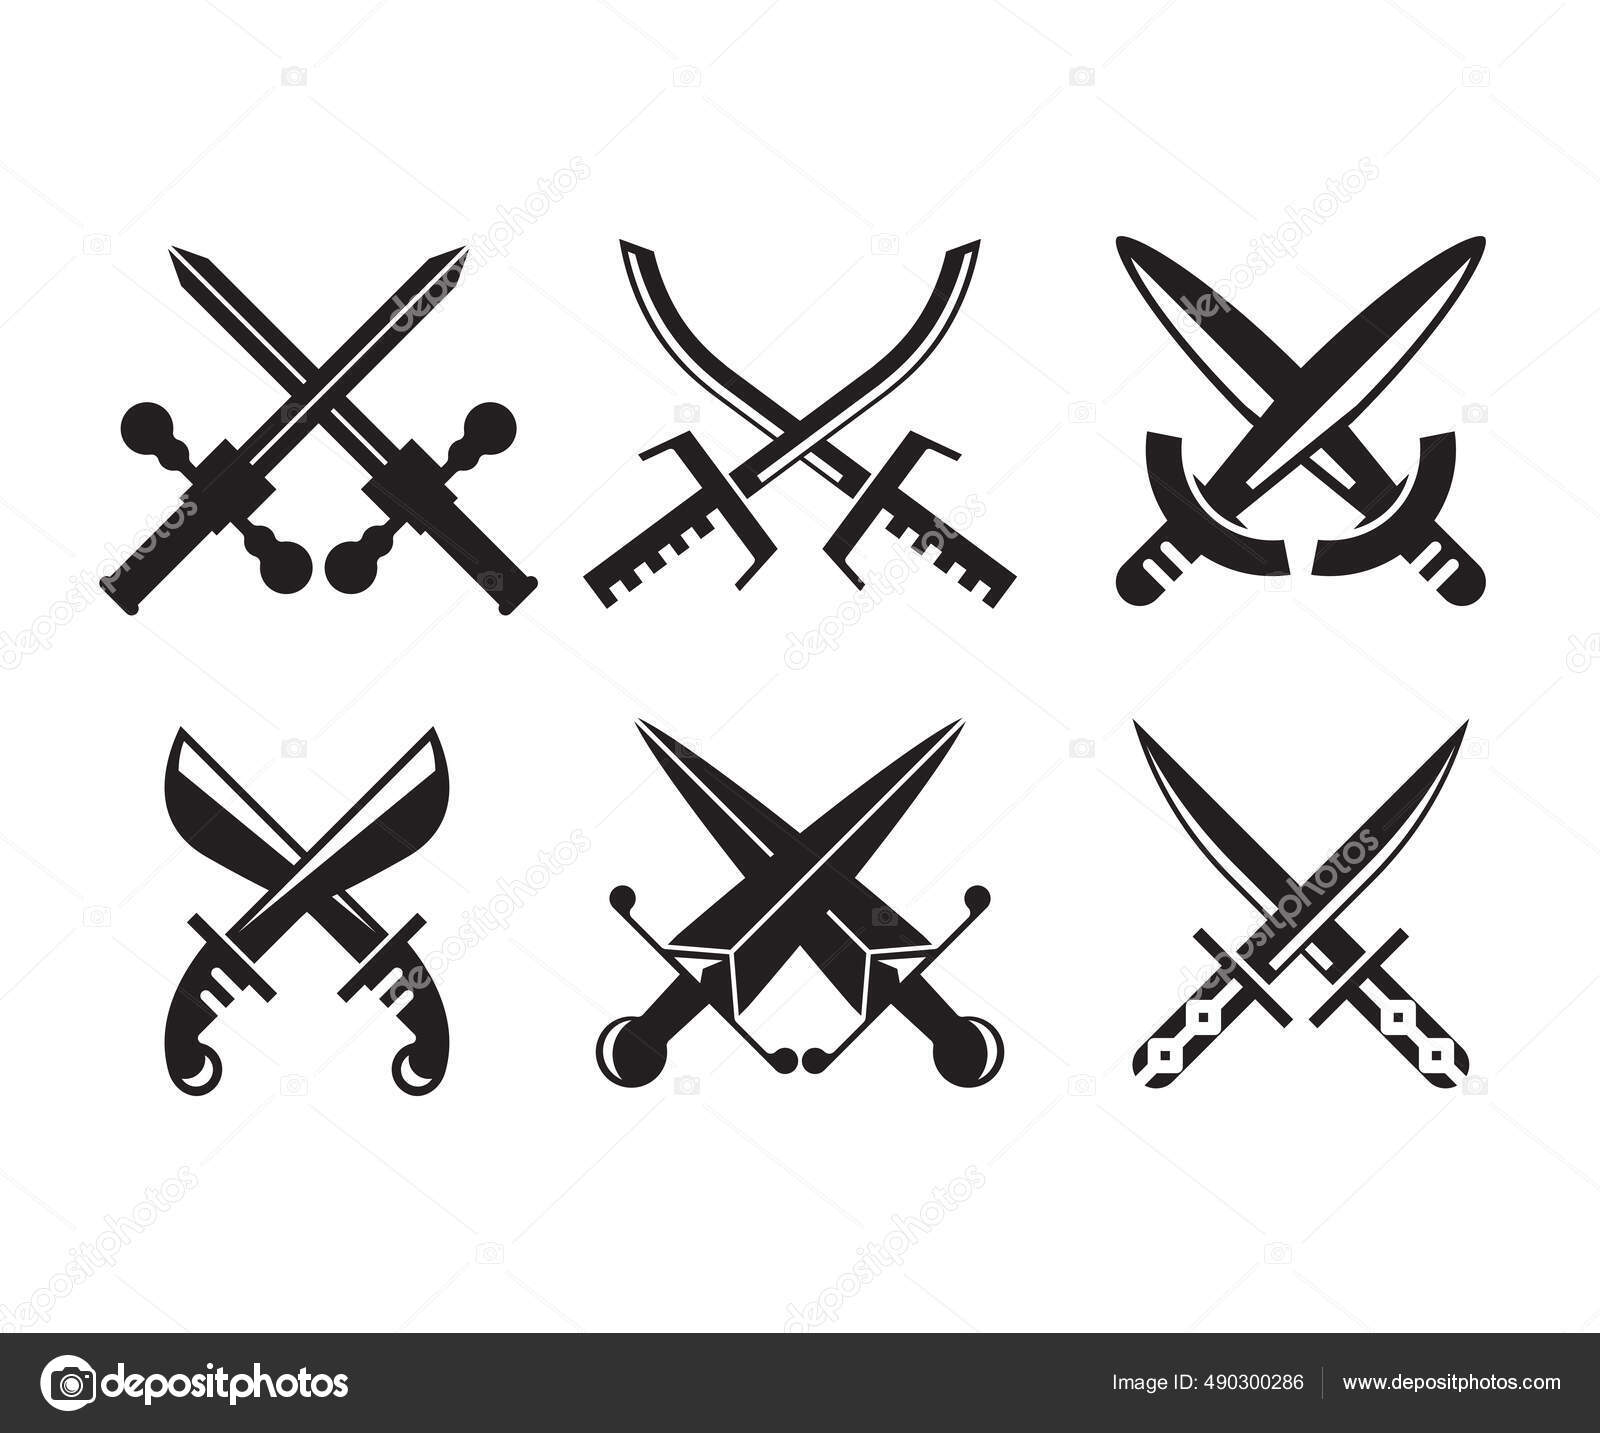 Katana japanese crossed sword traditional weapon and japanese crossed  metallic swords knife. Japanese crossed swords icon cartoon vector  illustration on white background.